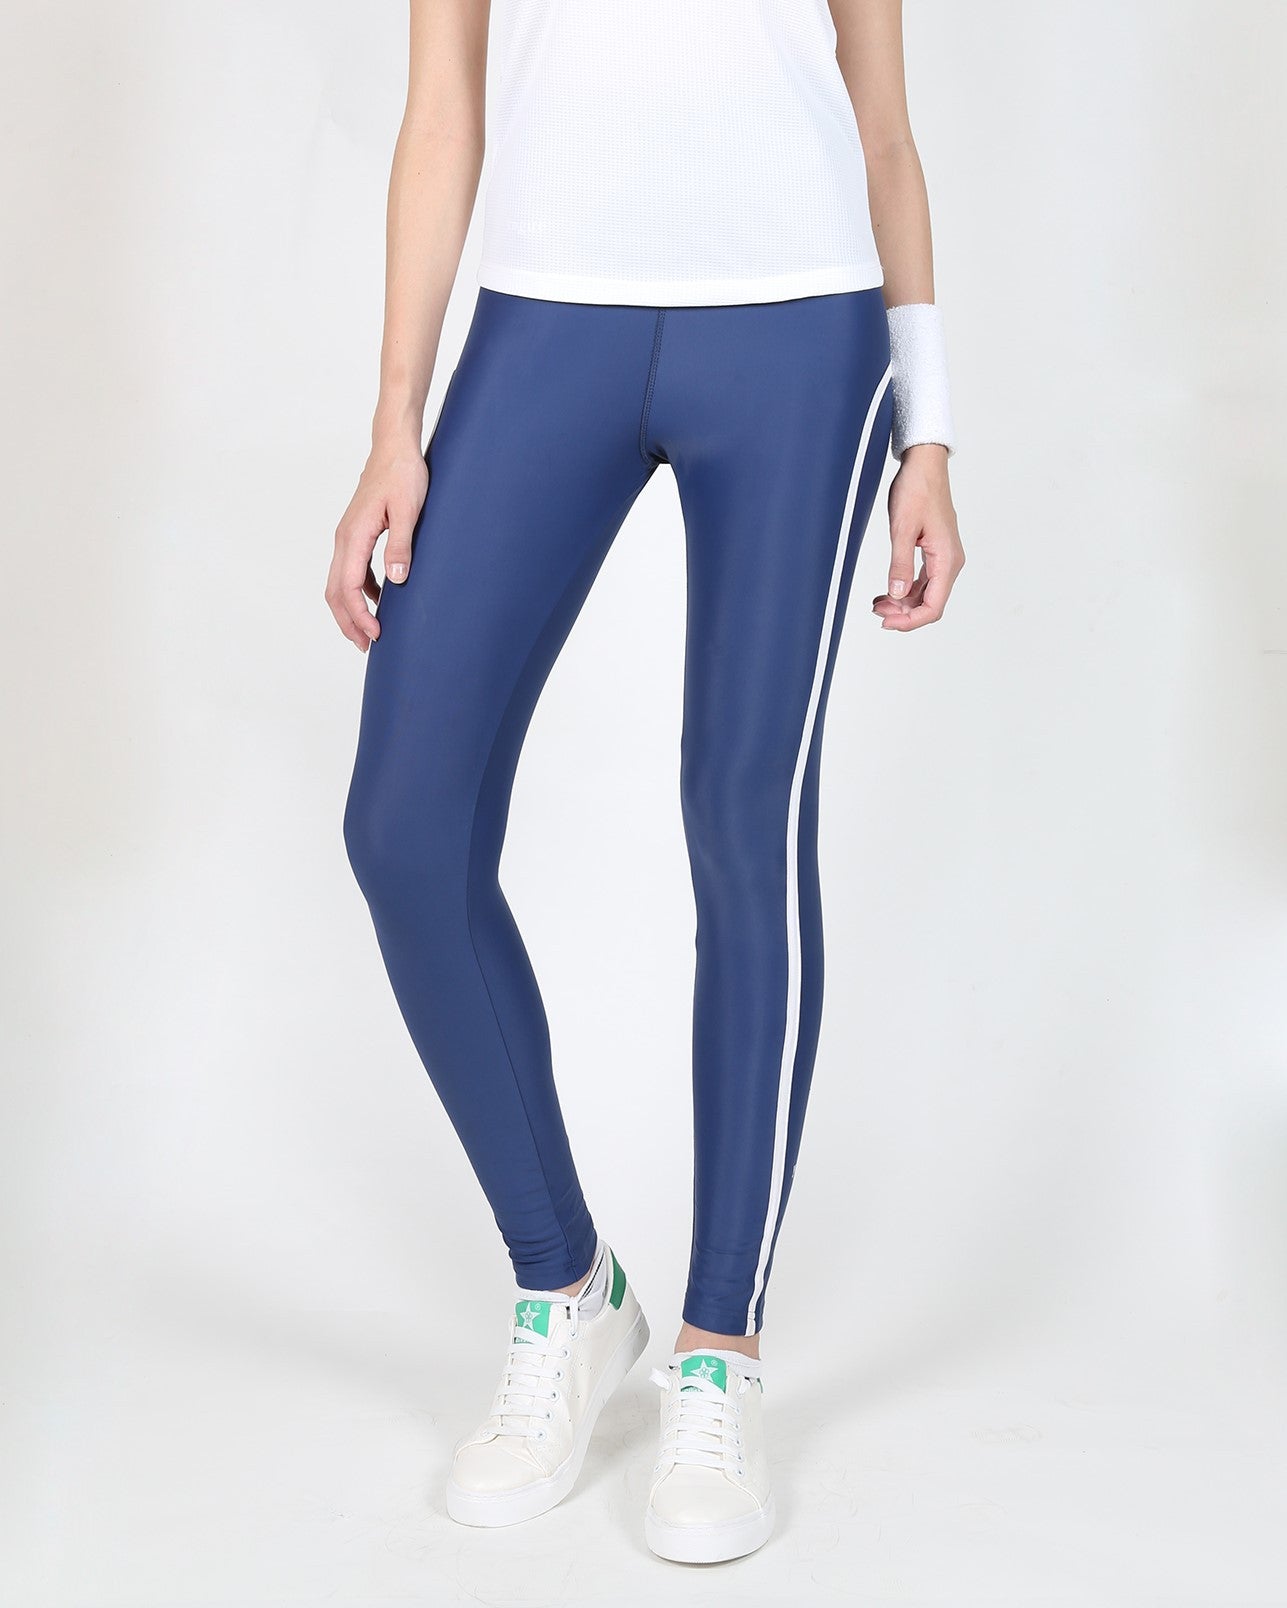 Dark Blue Tights with White Stripes - Yogue Activewear